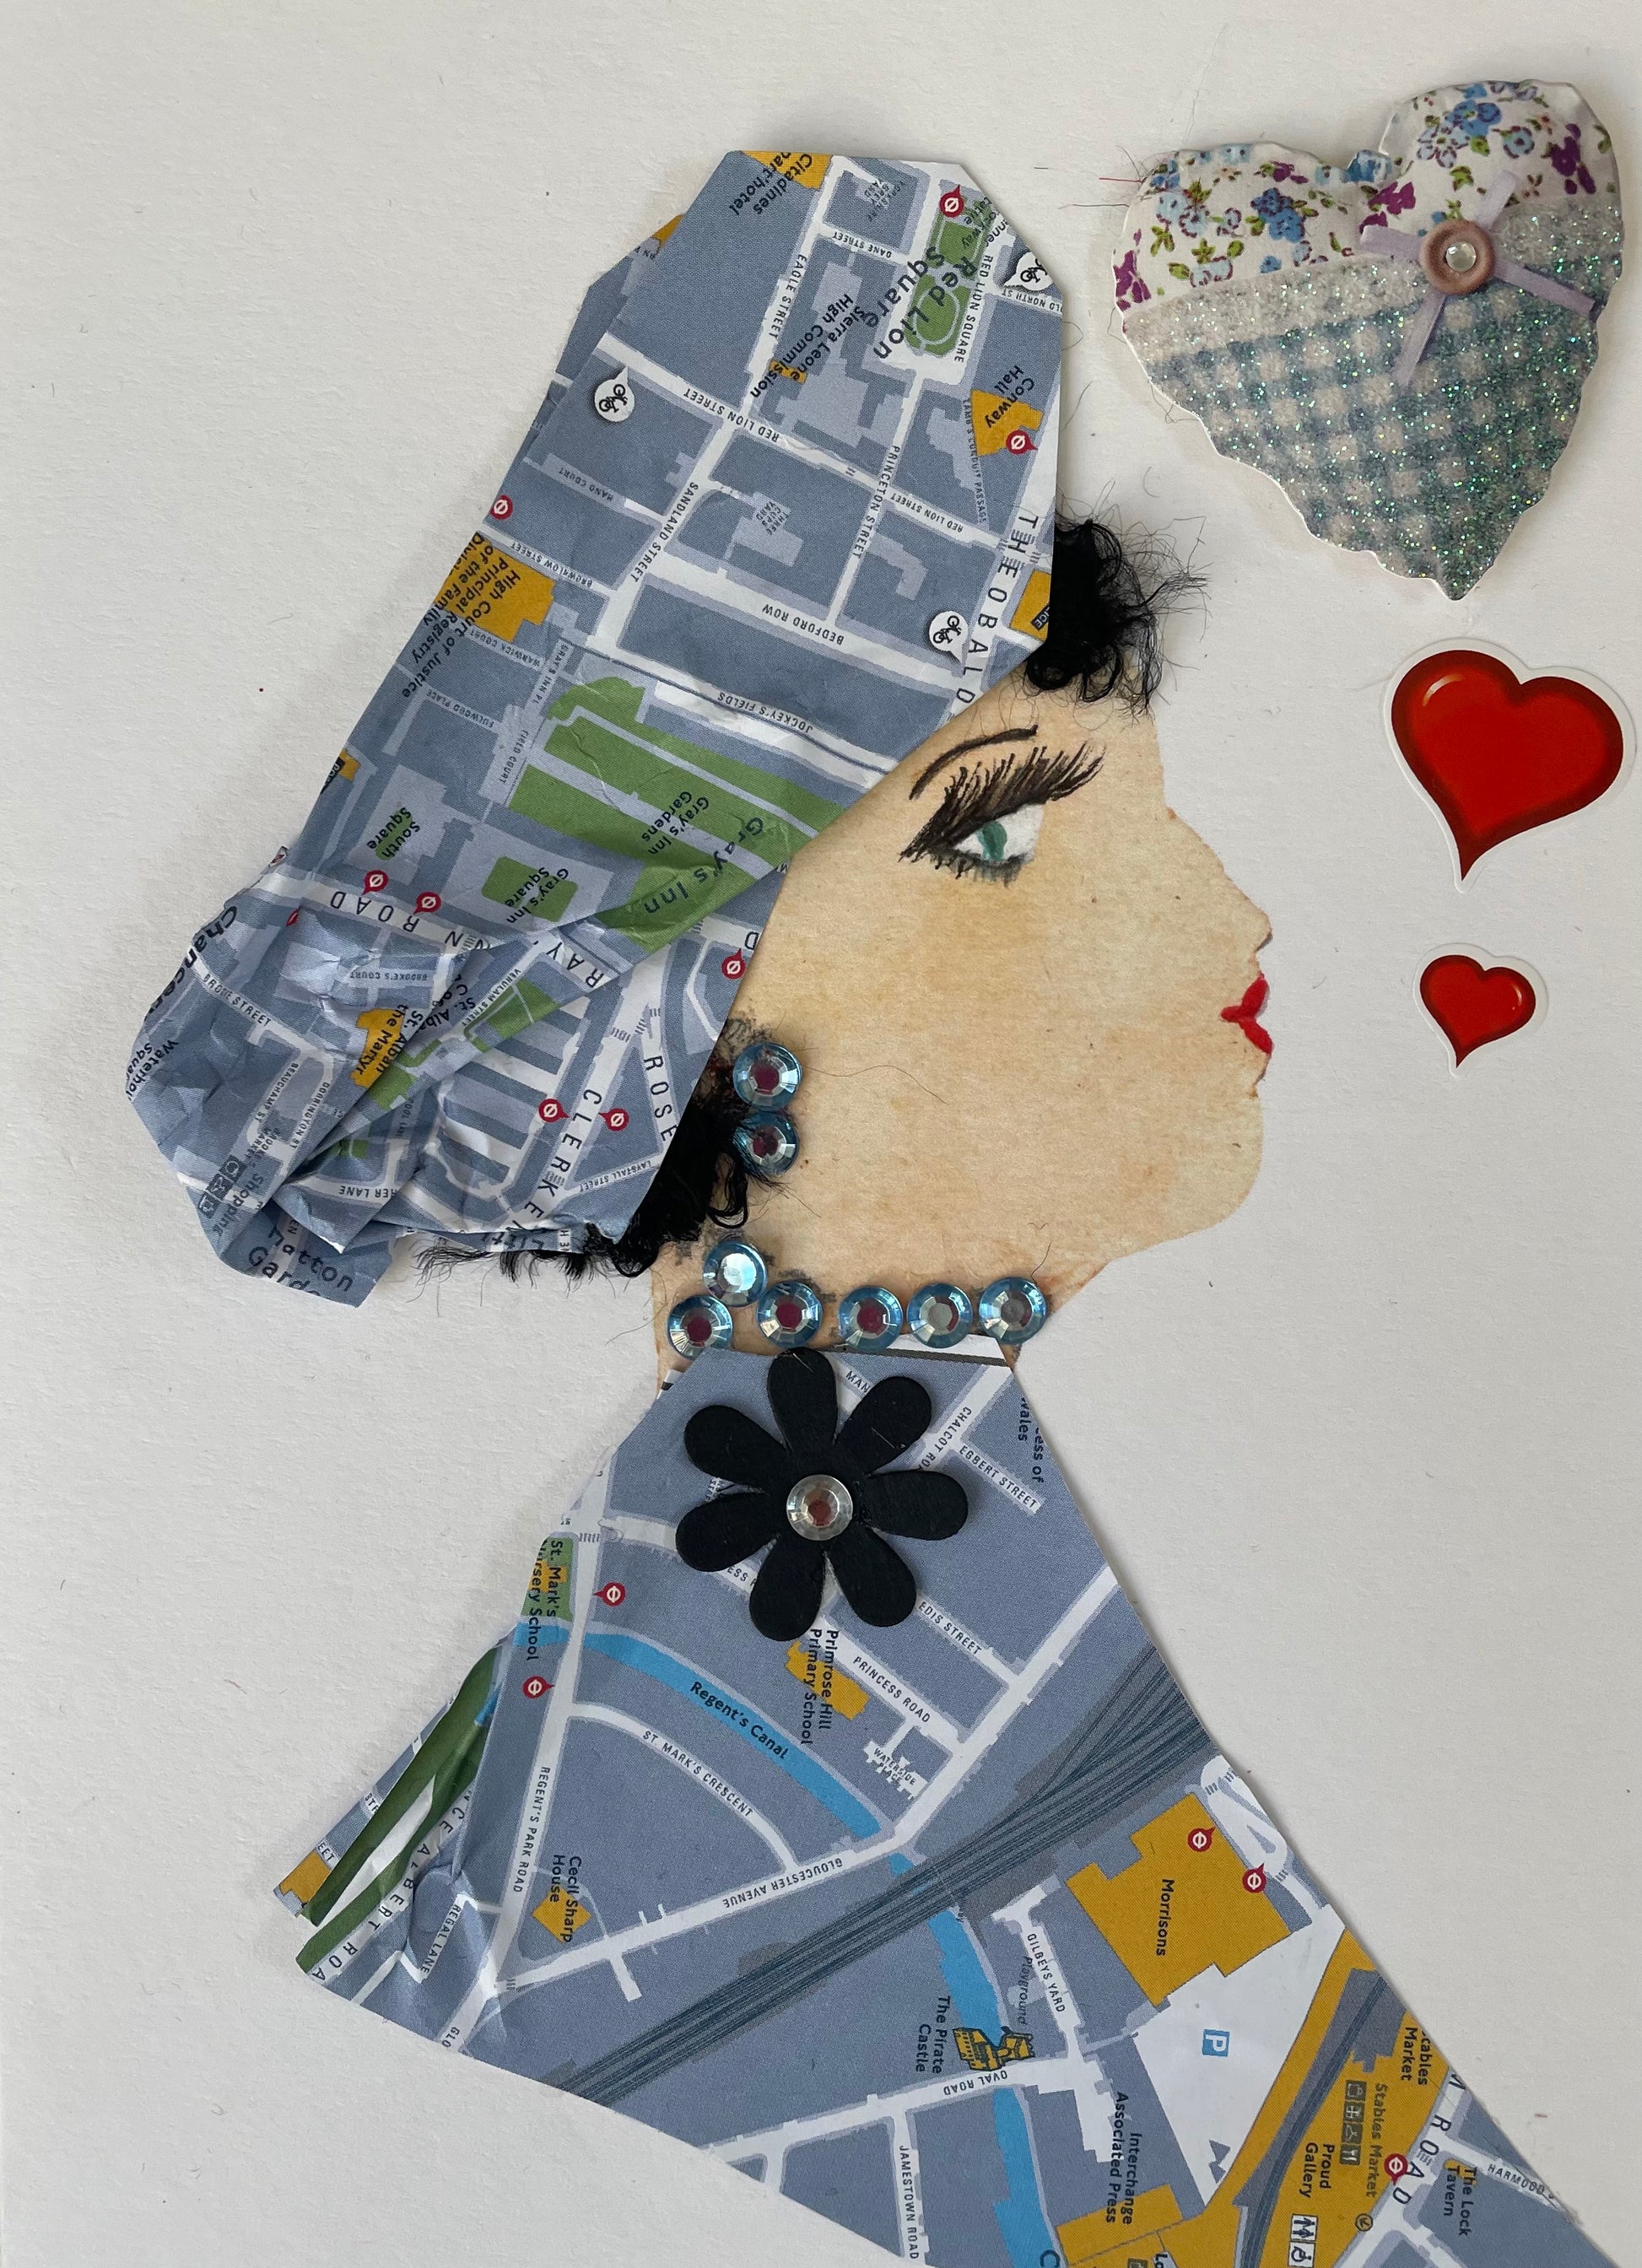 I designed this card of a woman named Blissful Blue. She has a white skin tone  who is wearing a pale blue London map printed blouse with a matching headpiece. She has a black flower on her blouse. Blissful Blue is wearing similar shiny blue jewel-like earrings and necklace. There are 2 red hearts to the right of her with a bigger quilted heart above those. 